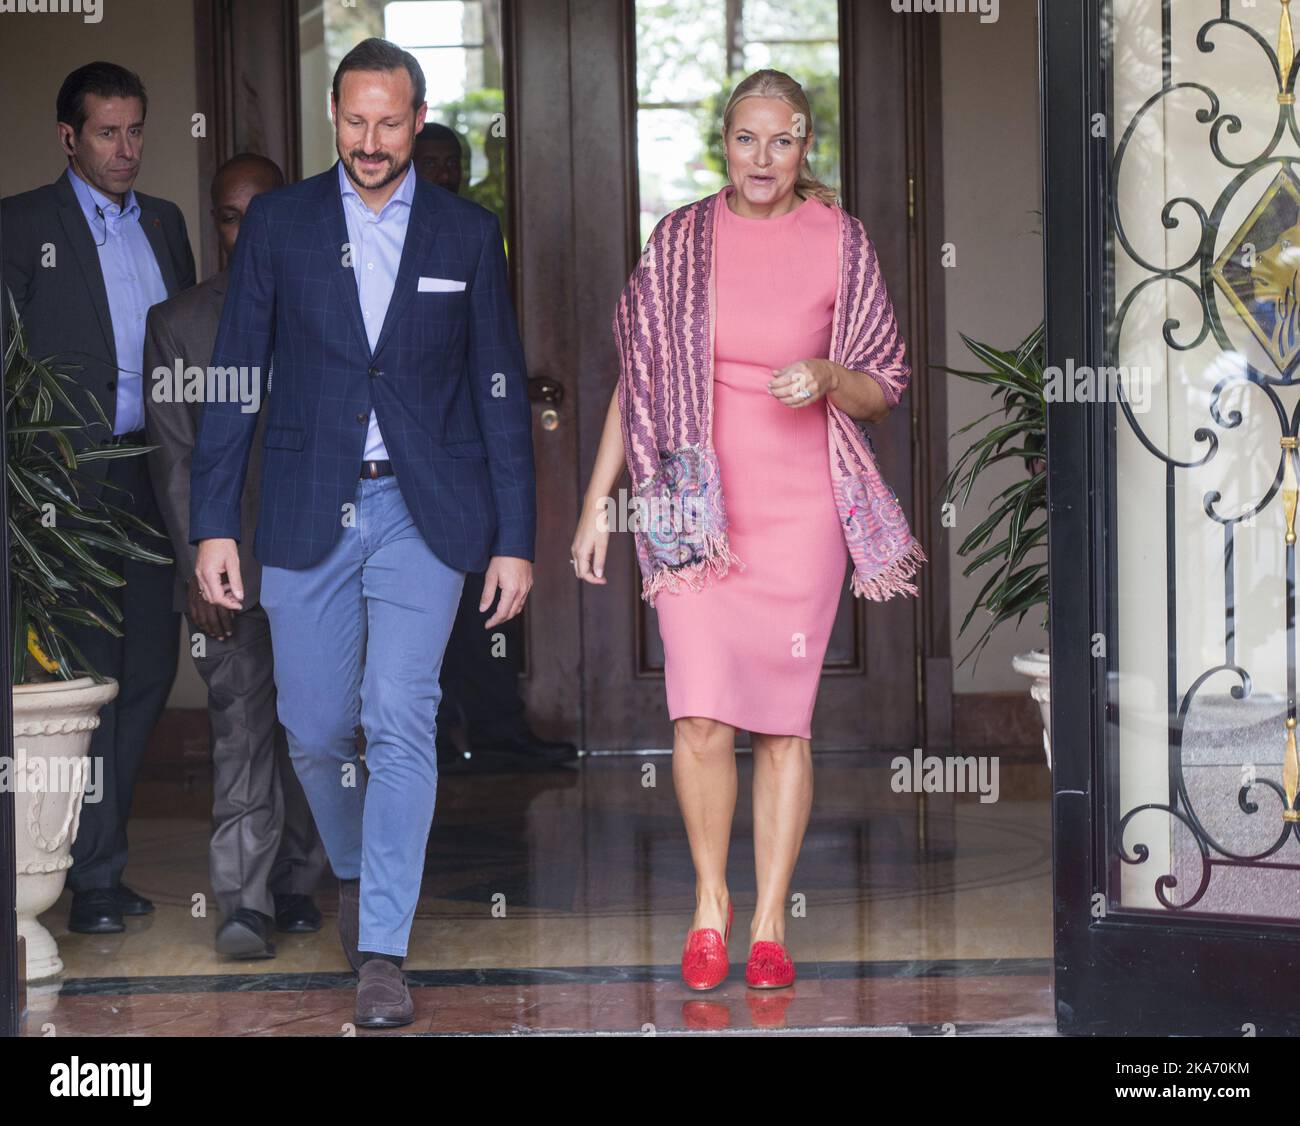 Addis Ababa, Ethiopia 20171106. Their Royal Highnesses The Crown Prince of Norway and Crown Princess visit Ethiopia 7 - 9 November 2017. Crown Prince Haakon and Crown Princess Mette-Marit come out of Sheraton hotel in Addis Ababa. Photo: Vidar Ruud / NTB scanpi Stock Photo